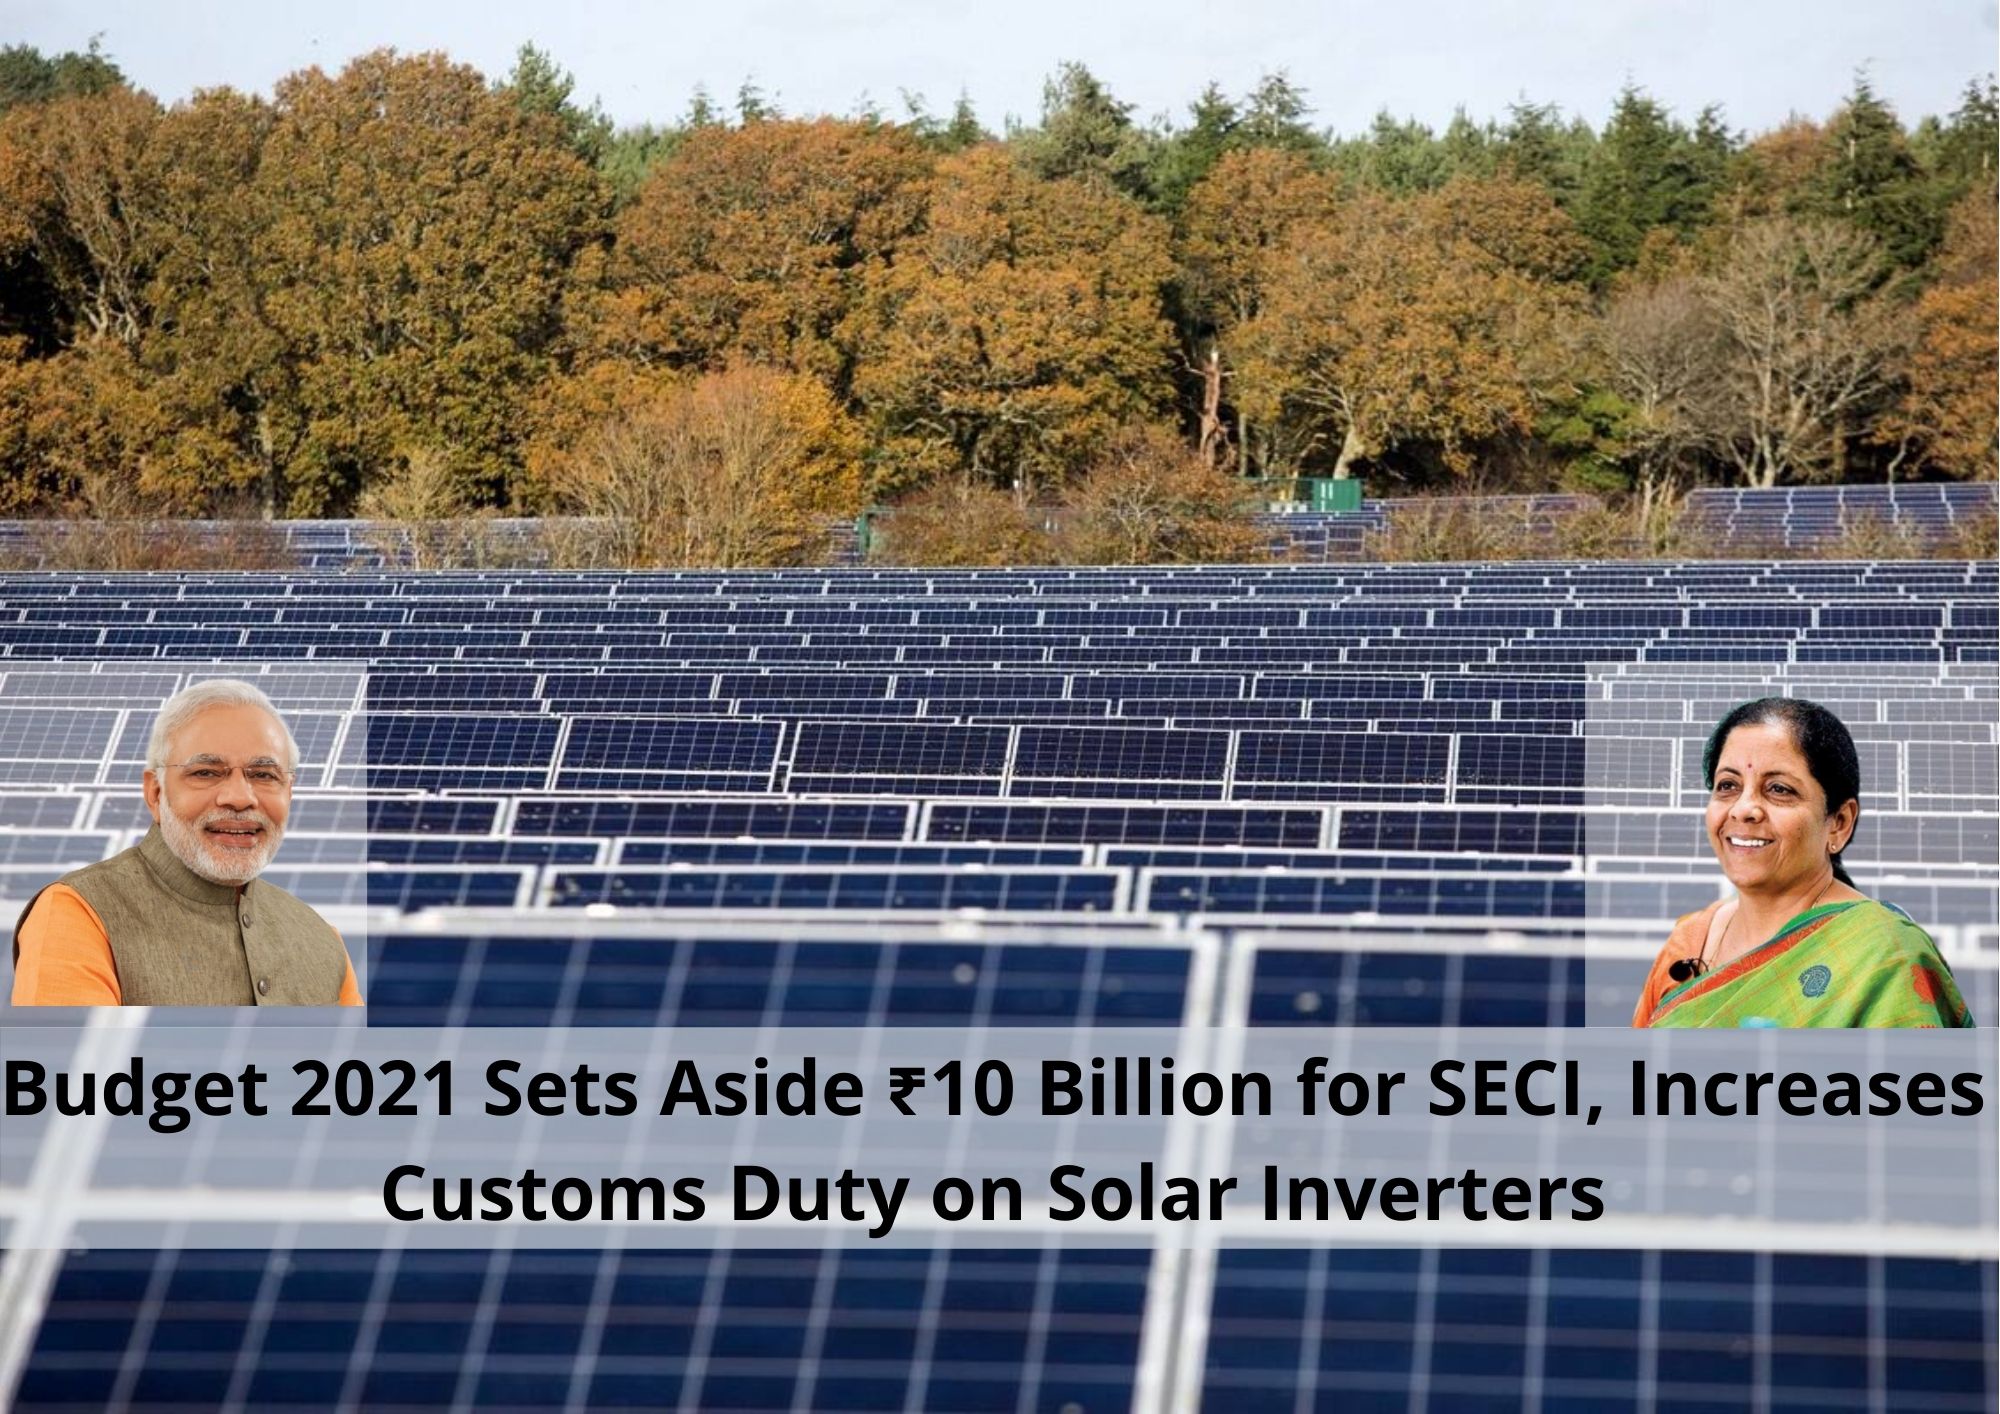 Budget 2021 Sets Aside ₹10 Billion for SECI, Increases Customs Duty on Solar Inverters